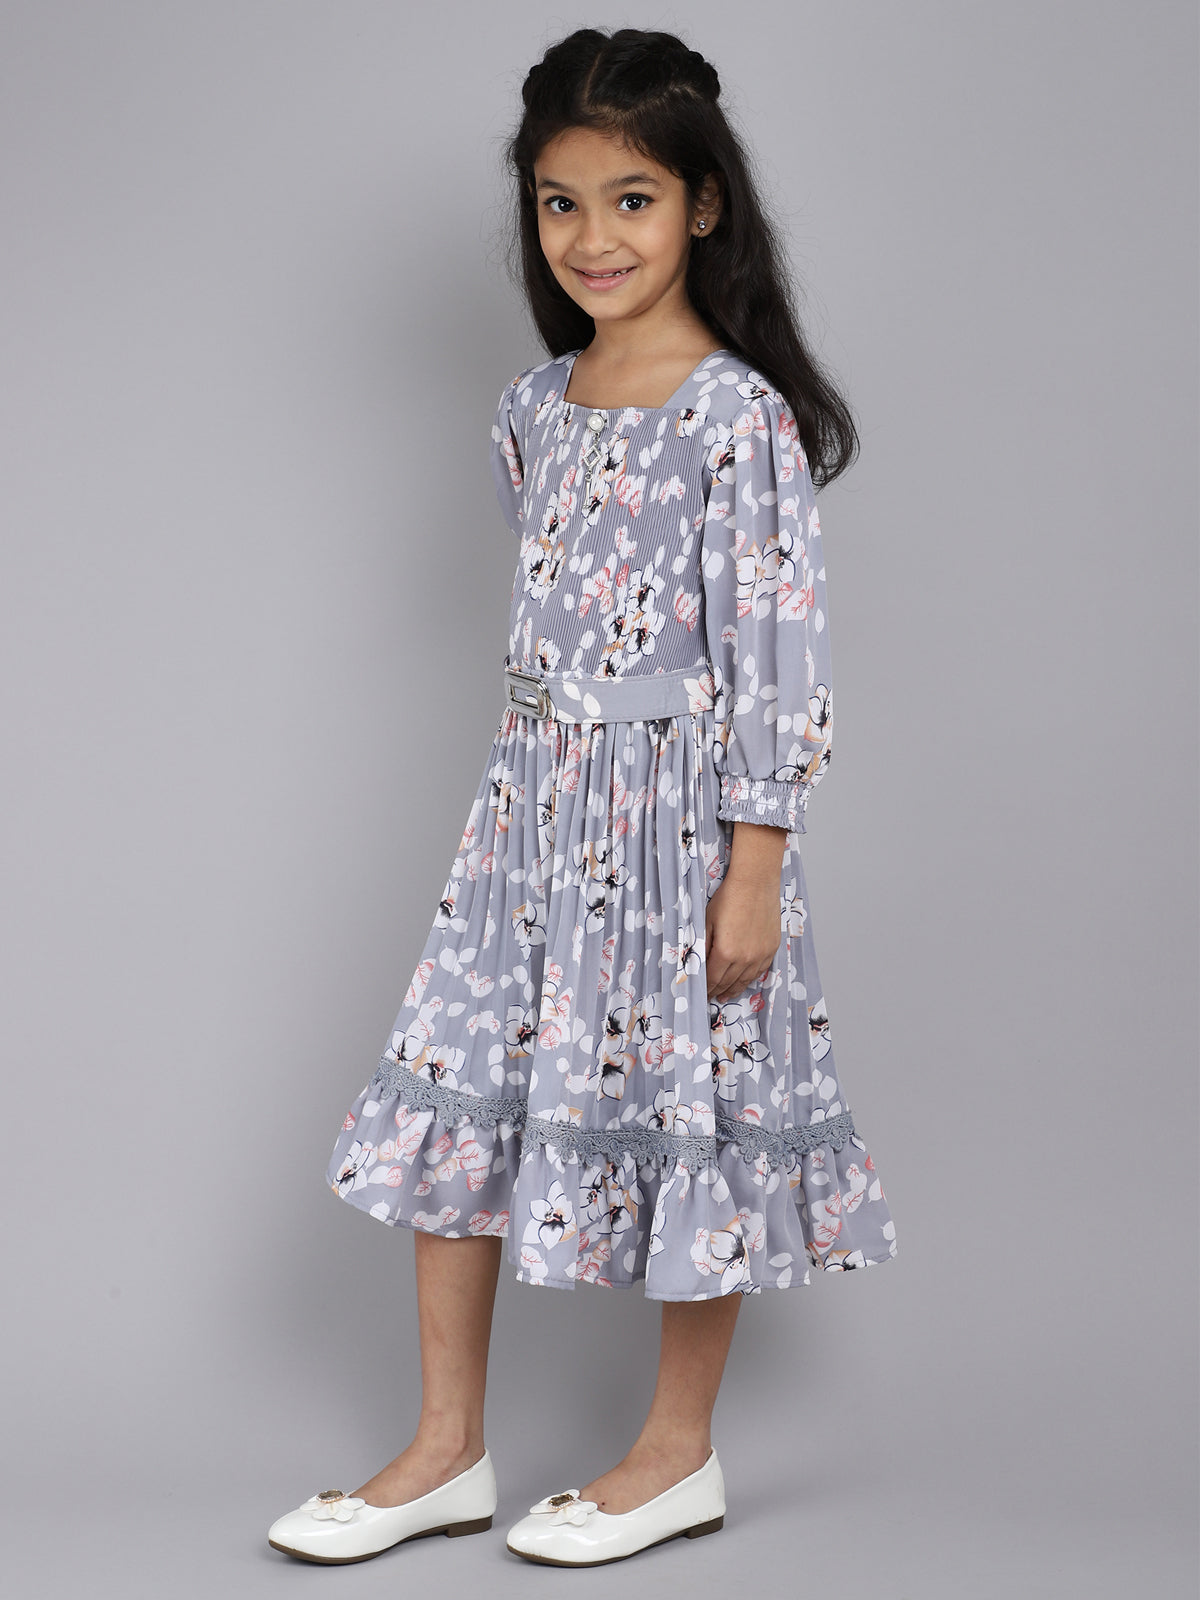 Dress 3/4th Sleeve Floral Print with Grey Color for kids